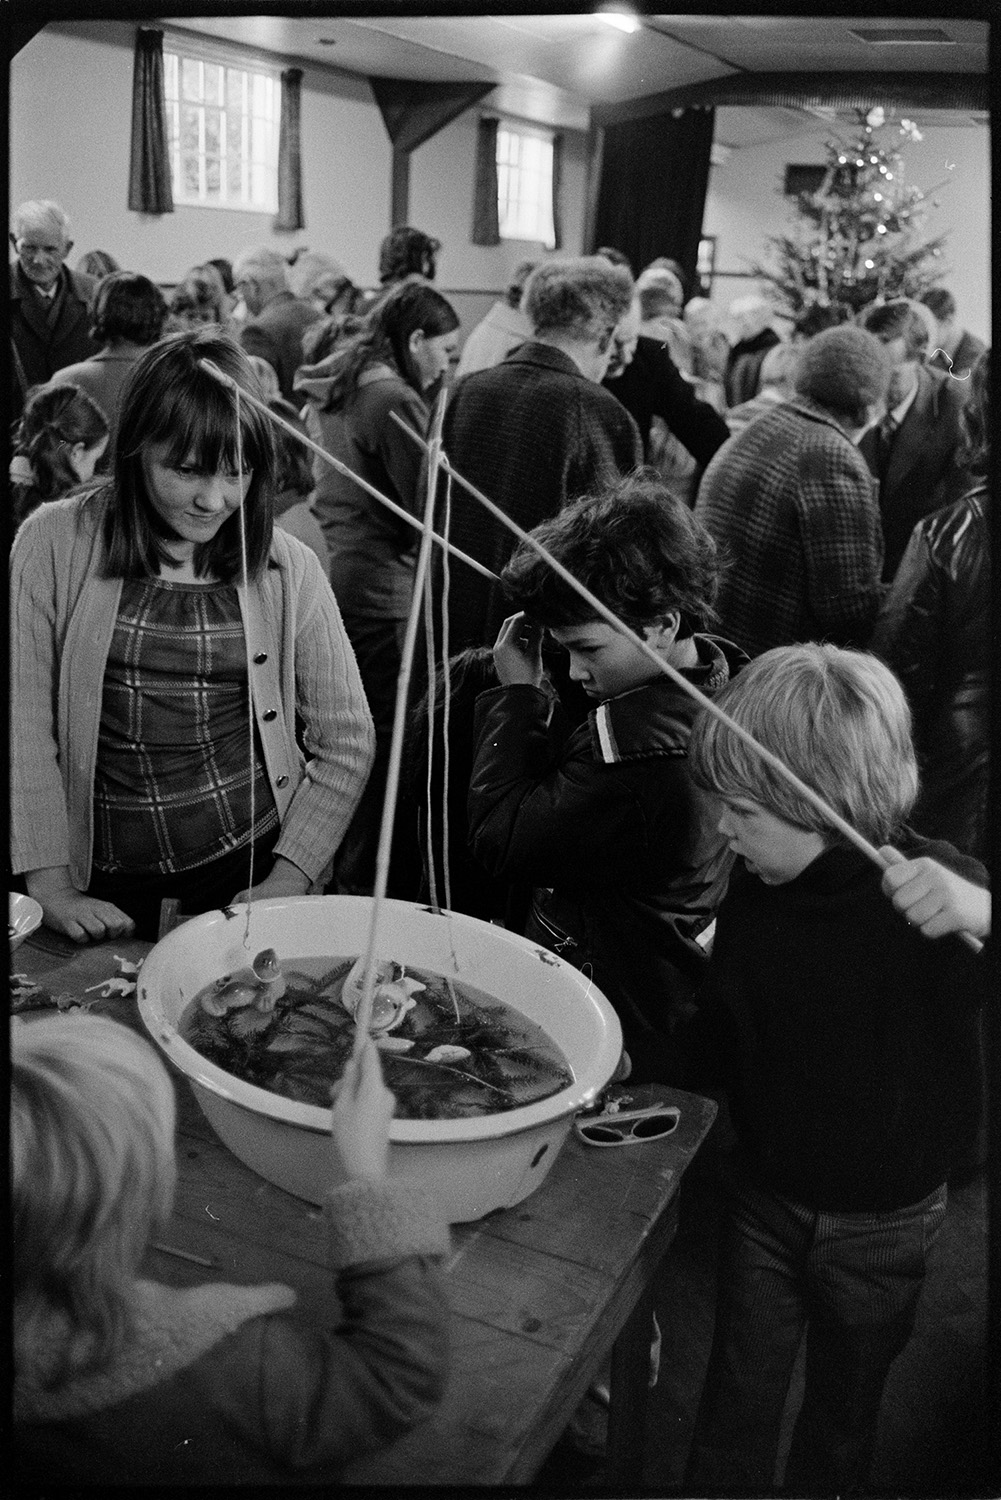 Christmas sale in village hall games and jumble.
[A woman watching three children playing a fishing game at a Christmas sale in Dolton Village Hall. A crowd at the sale and Christmas tree can be seen in the background.]